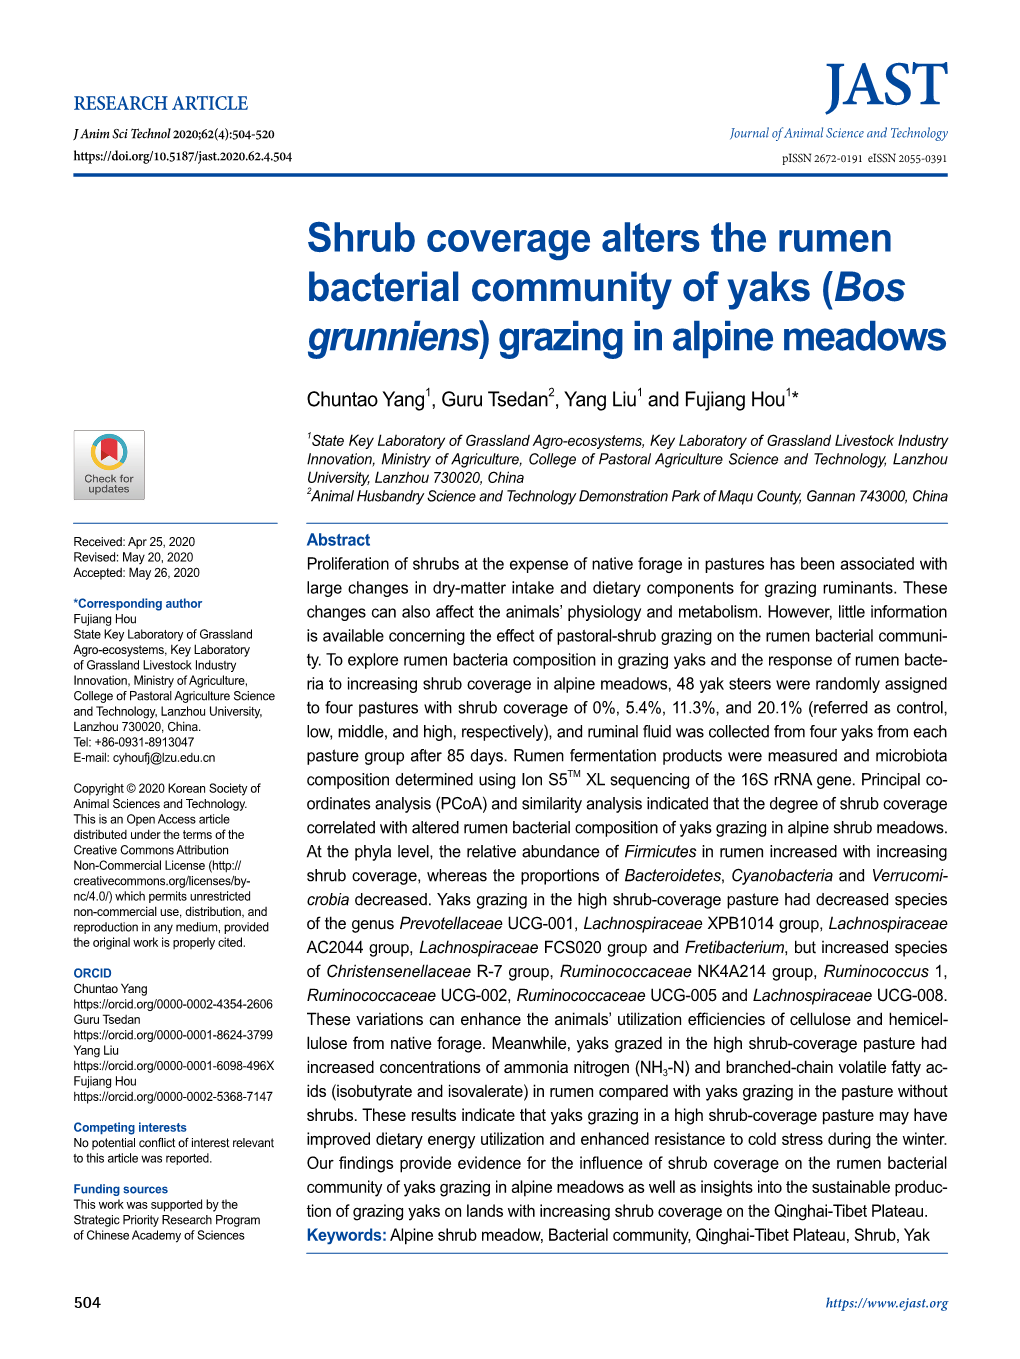 Shrub Coverage Alters the Rumen Bacterial Community of Yaks (Bos Grunniens) Grazing in Alpine Meadows